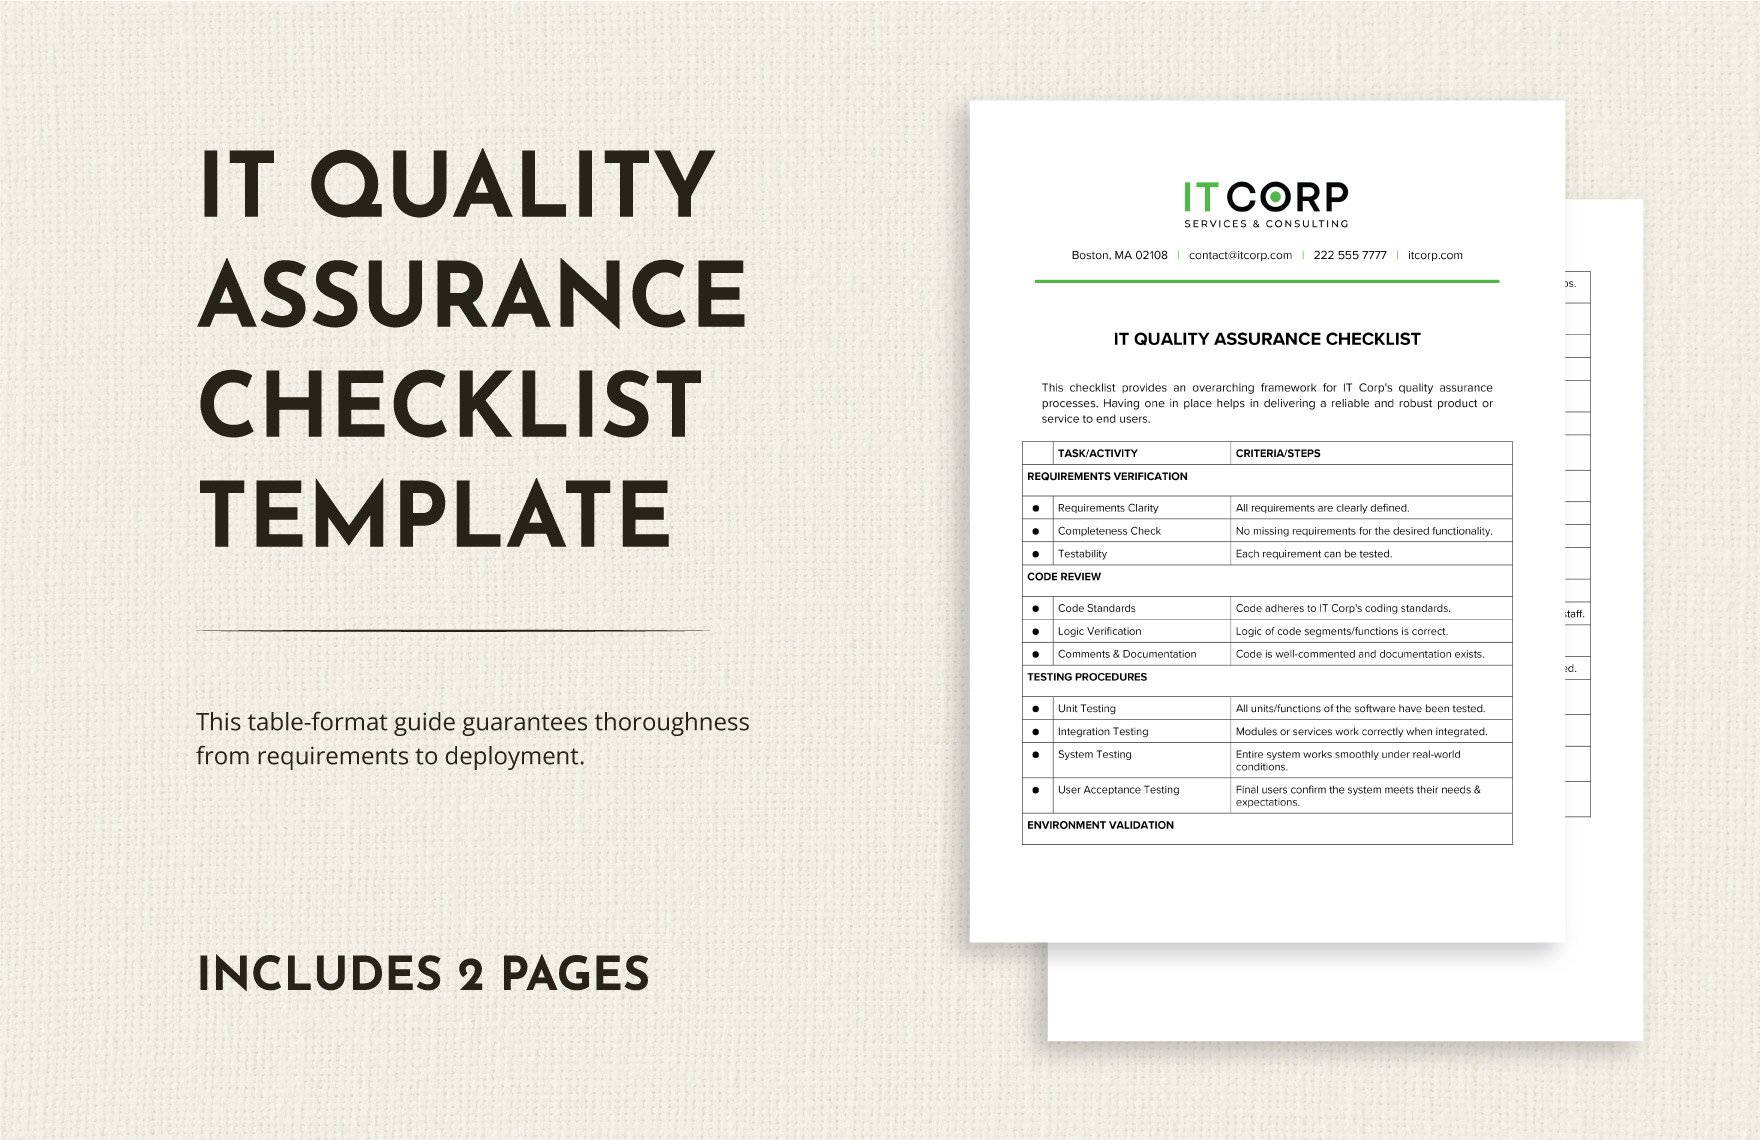 IT Quality Assurance Checklist Template in Word, Google Docs, PDF